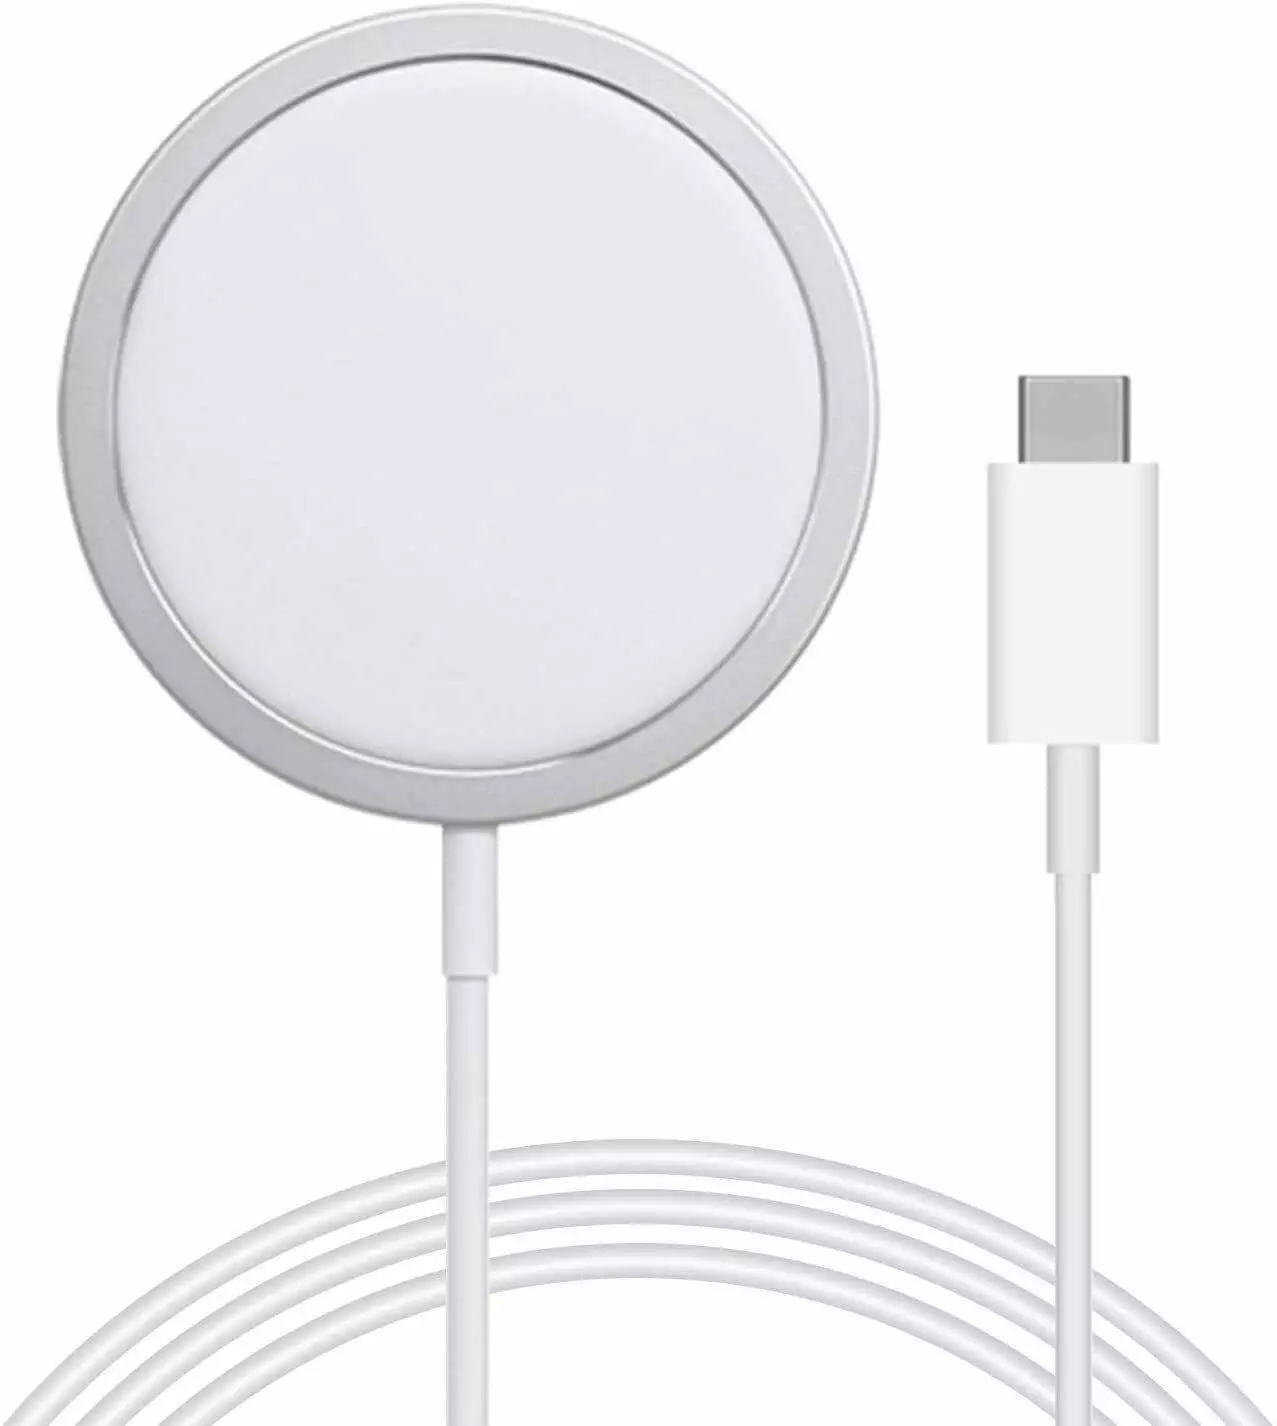 Magnetic 15W Fast Wireless Magsafe Charger for Apple iPhone 13 and Pro Max